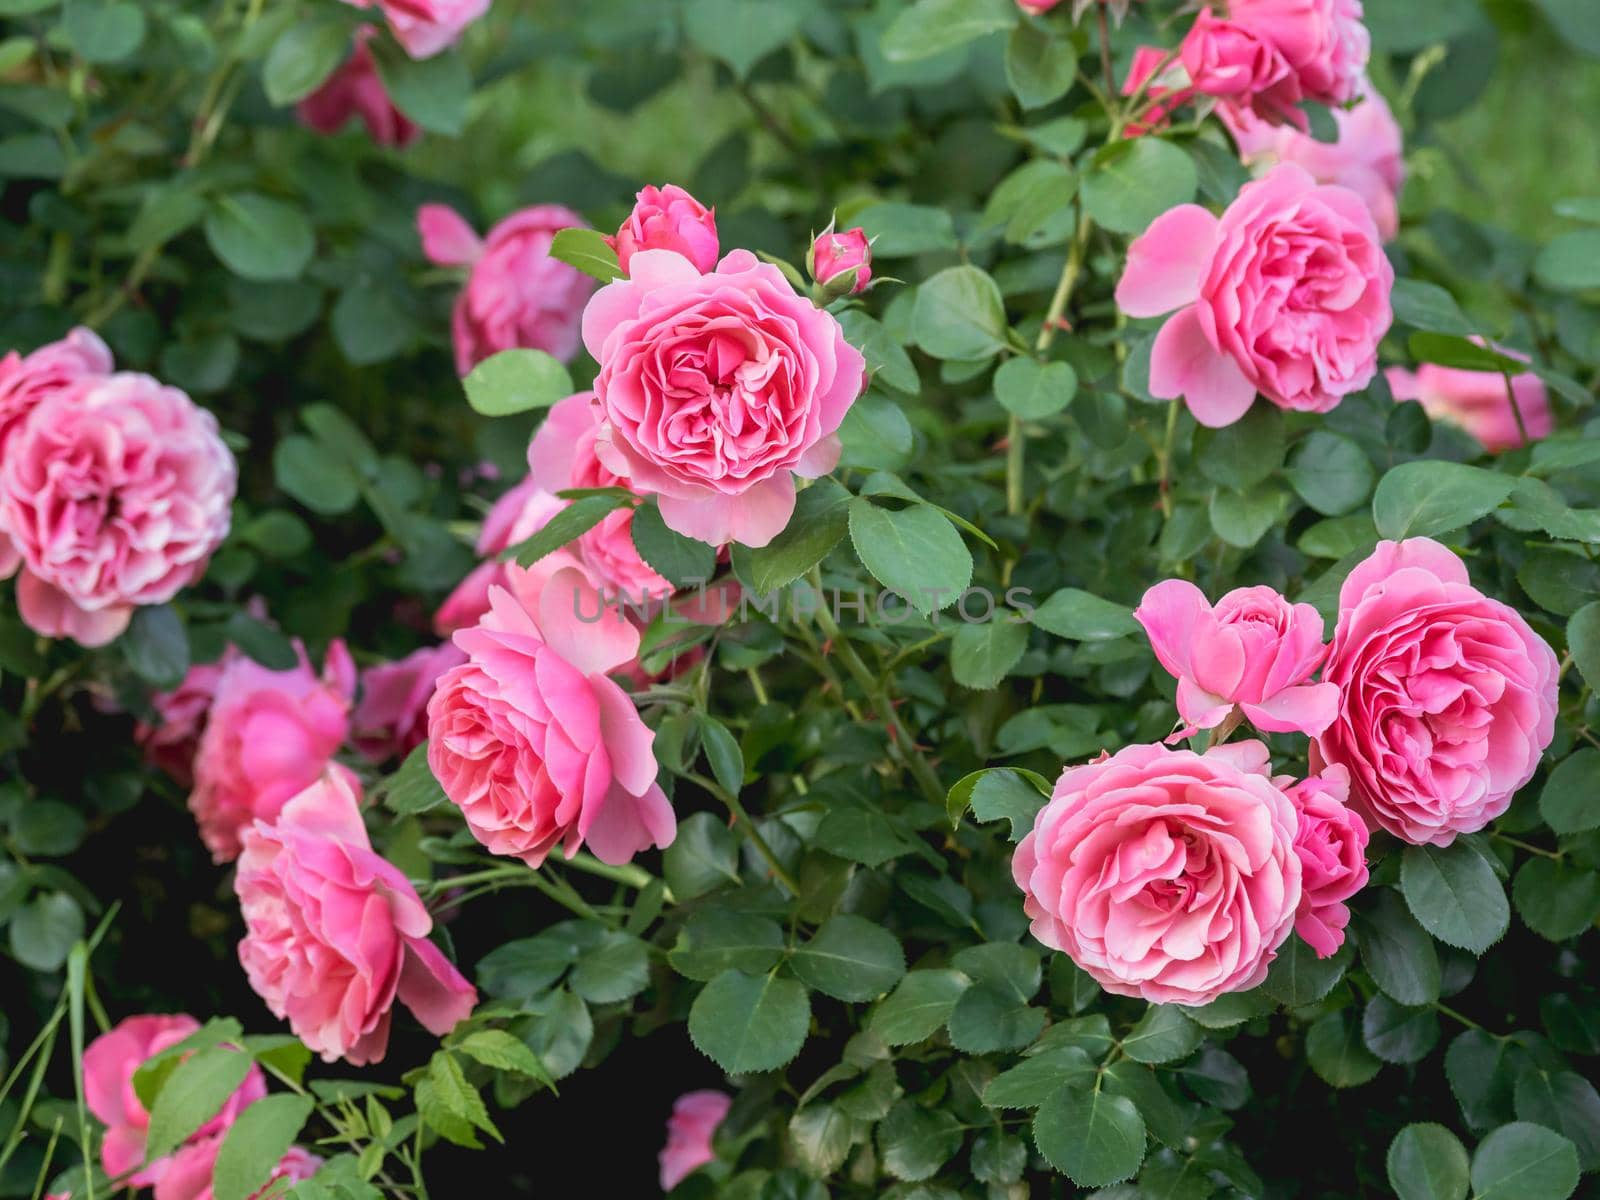 Natural summer background with thick pink roses on shrub. Beautiful blooming flowers on green leaves background.